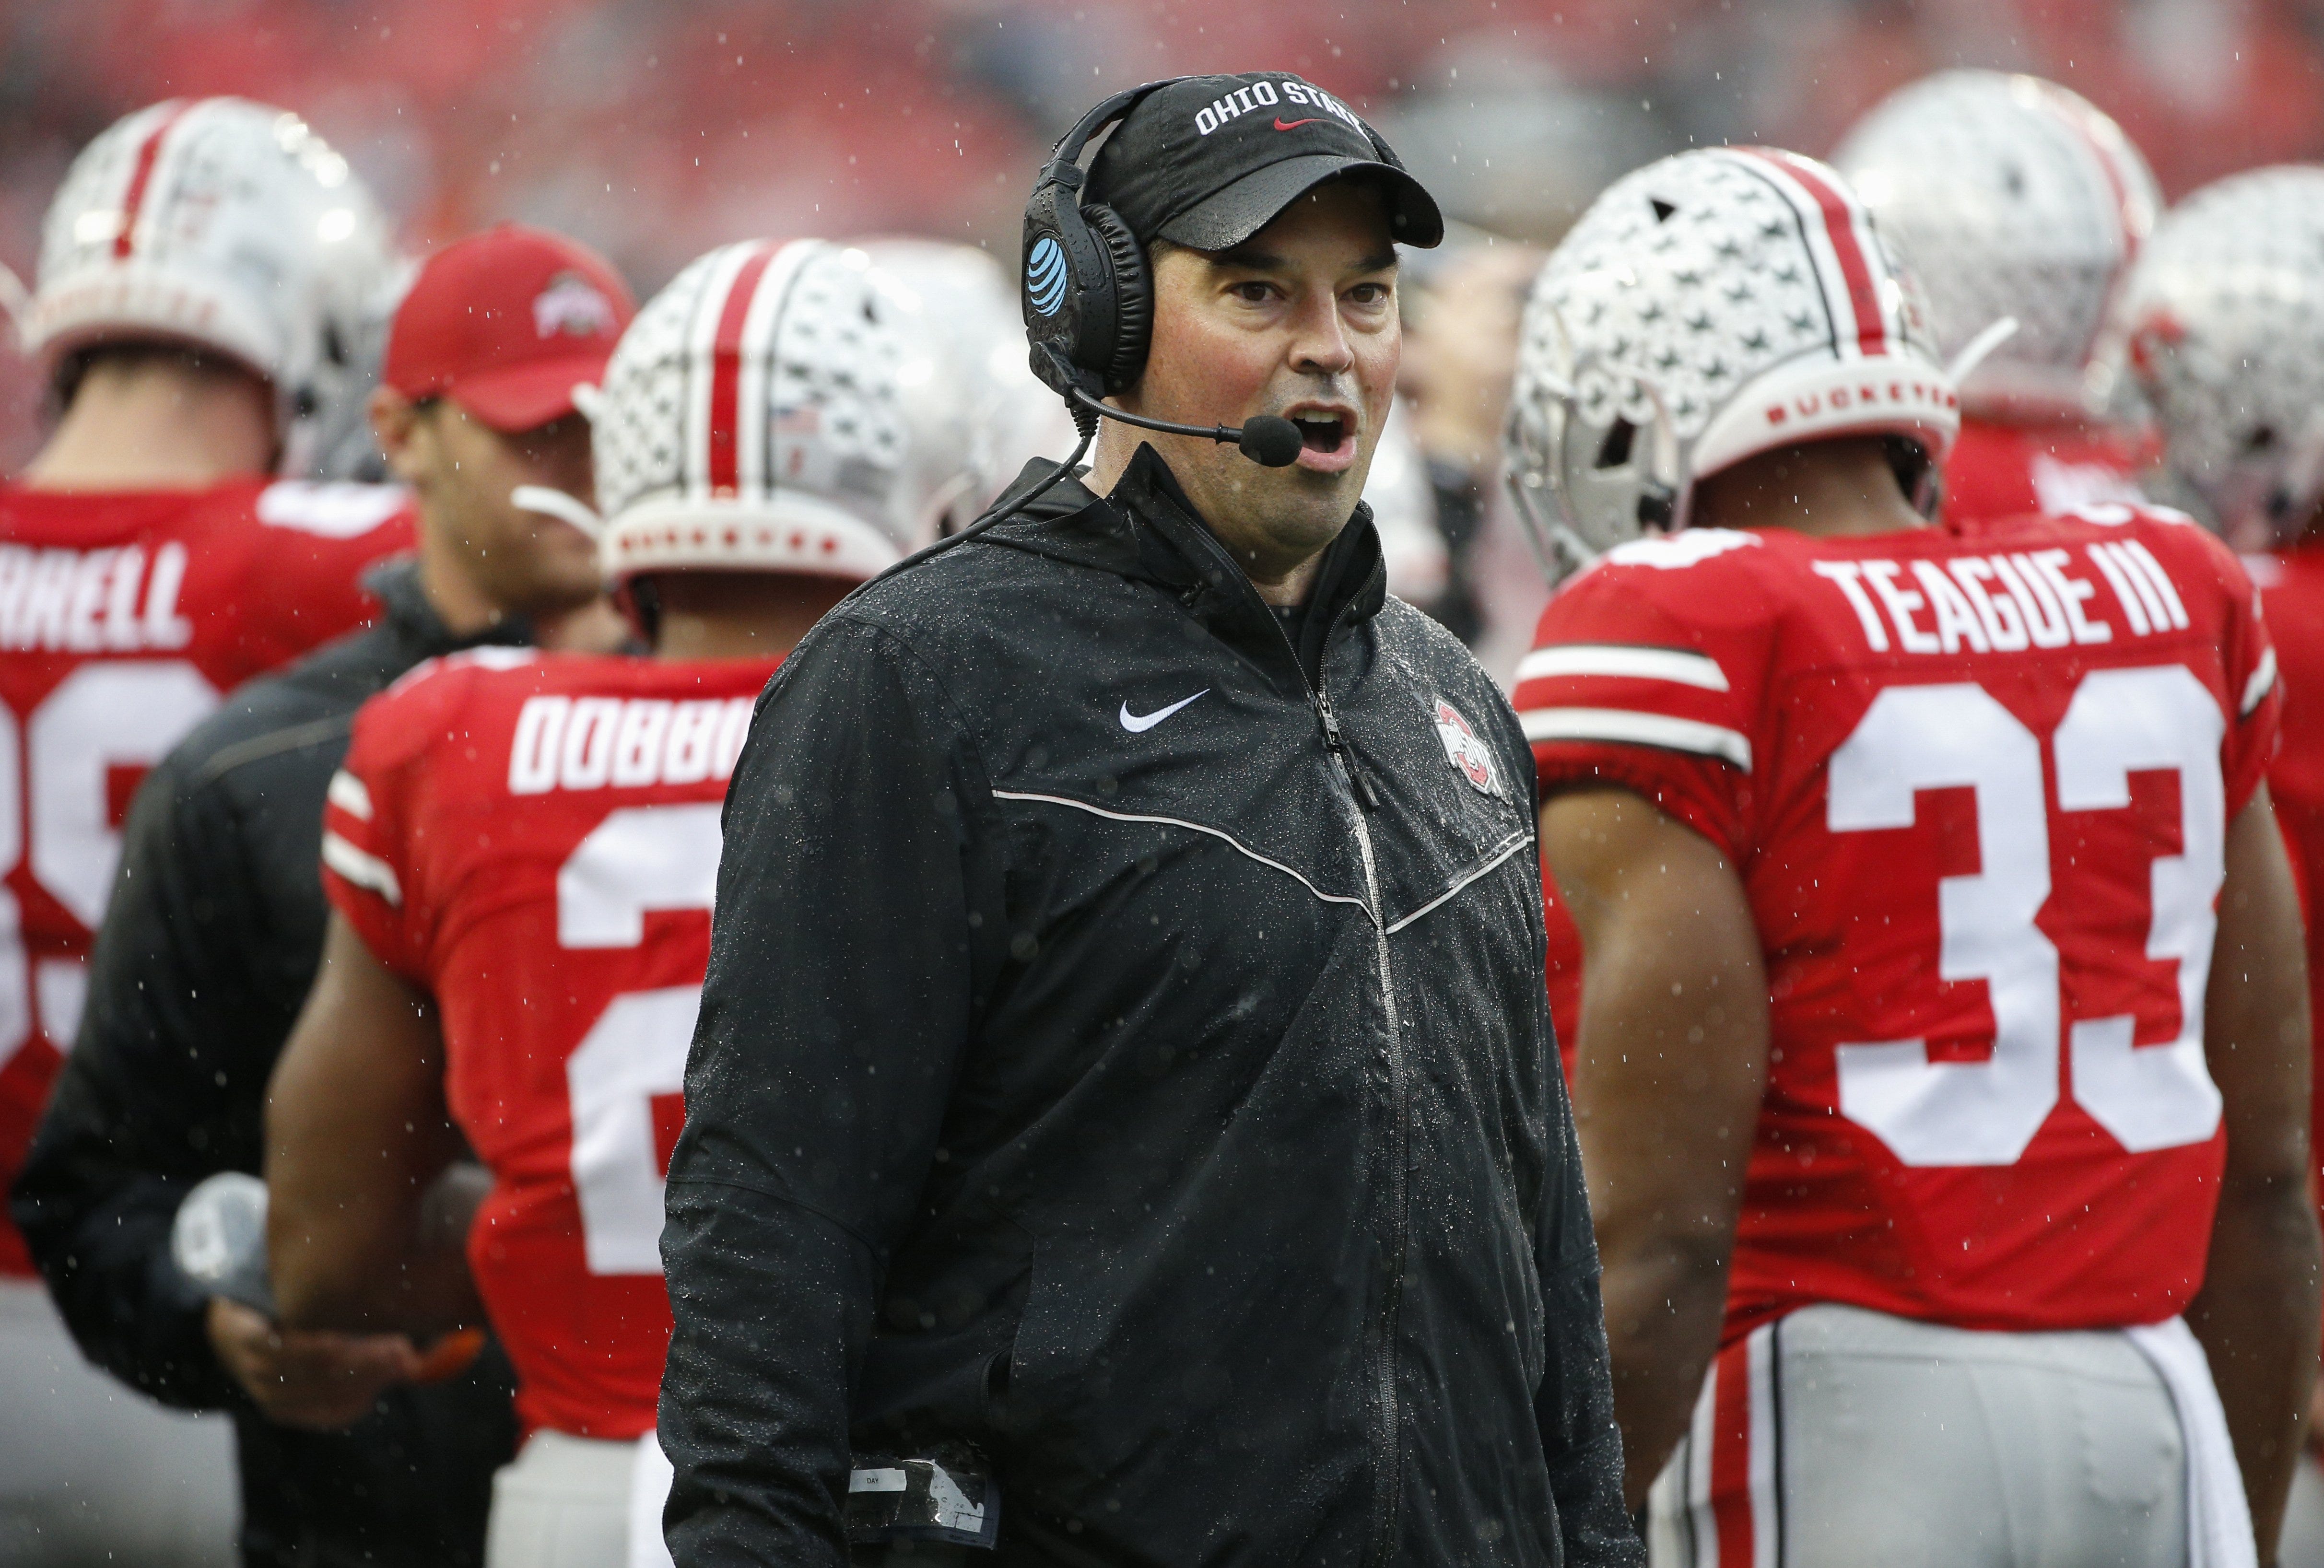 Ohio State coach Ryan Day tests positive for COVID-19 and will miss Illinois game